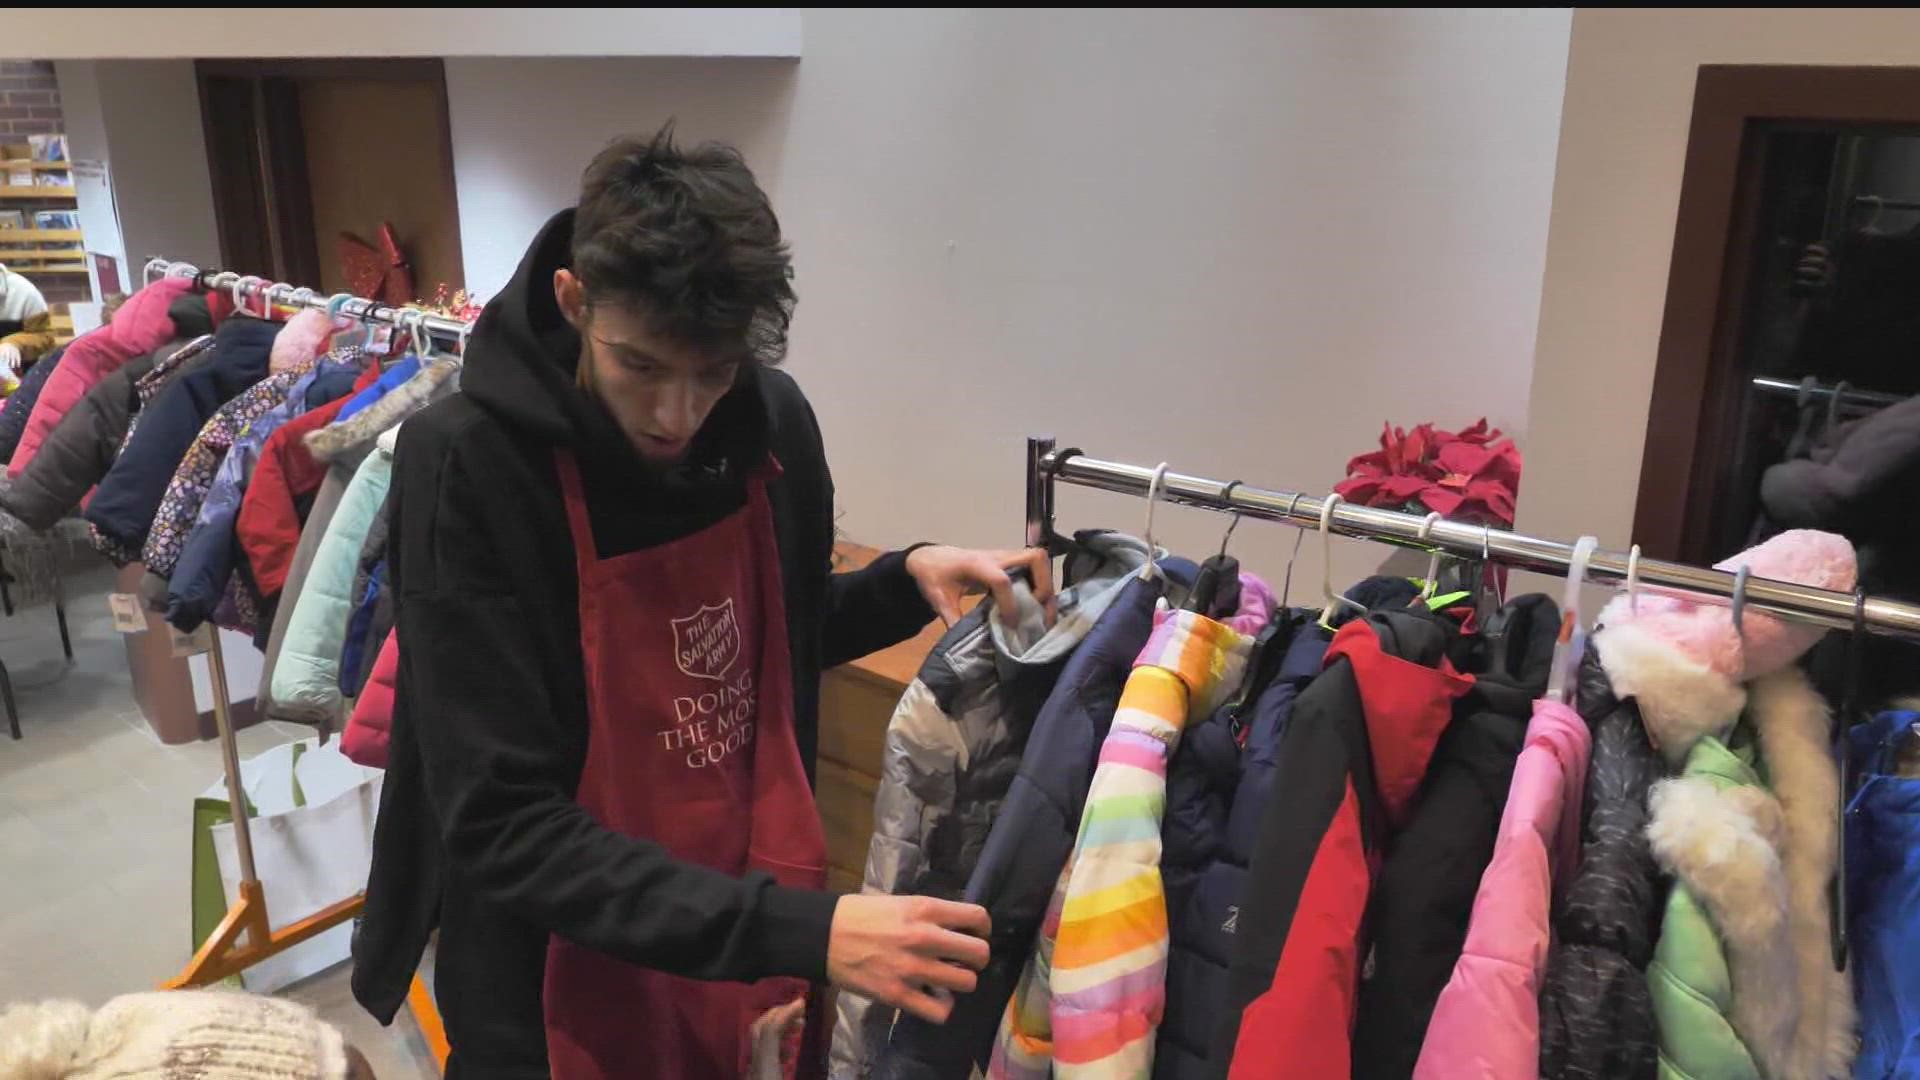 Hundreds of donated coats were damaged after the center was set on fire and vandalized.